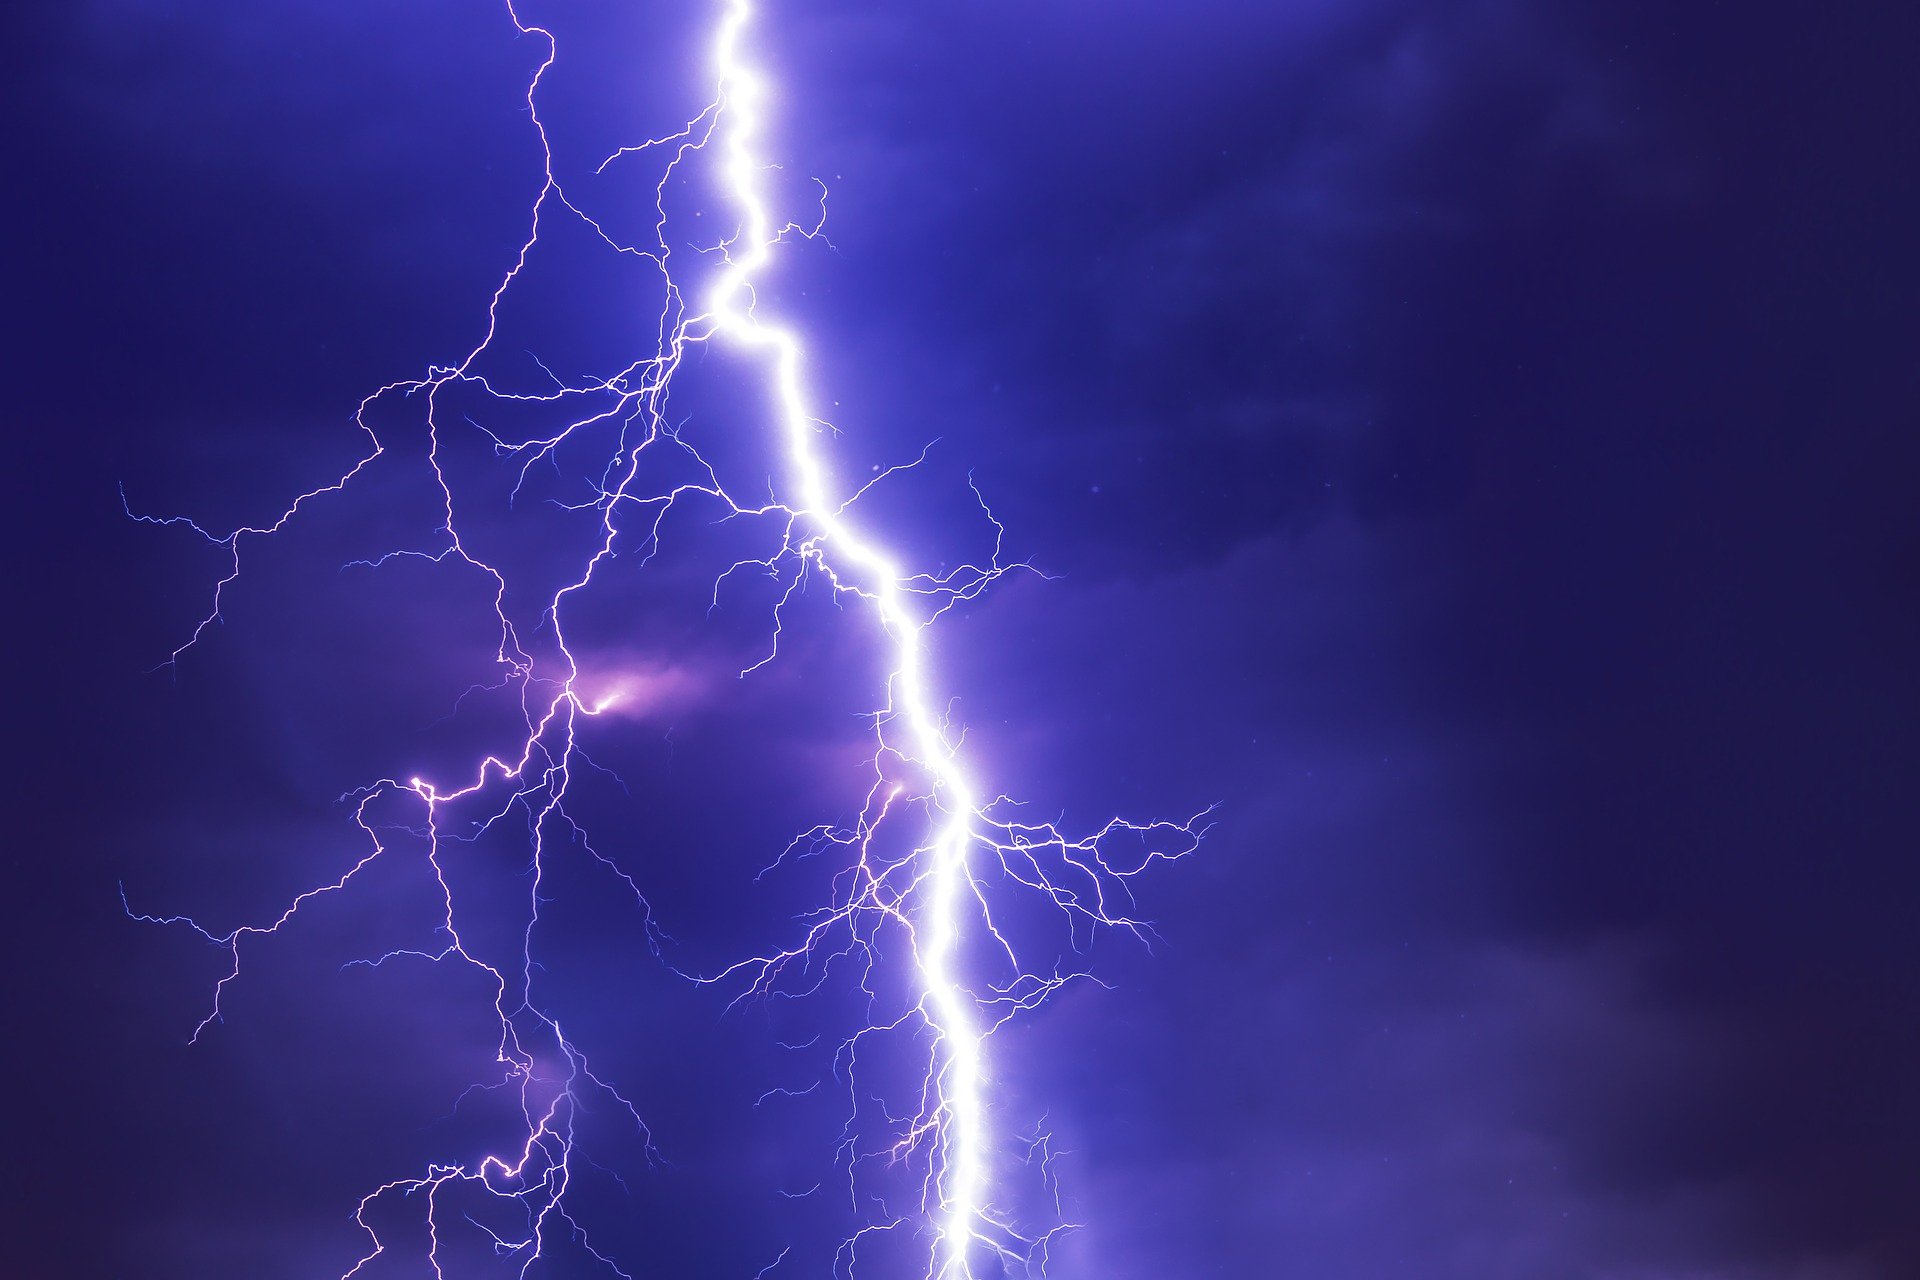 Did lightning really strike a golf ball in mid-air?